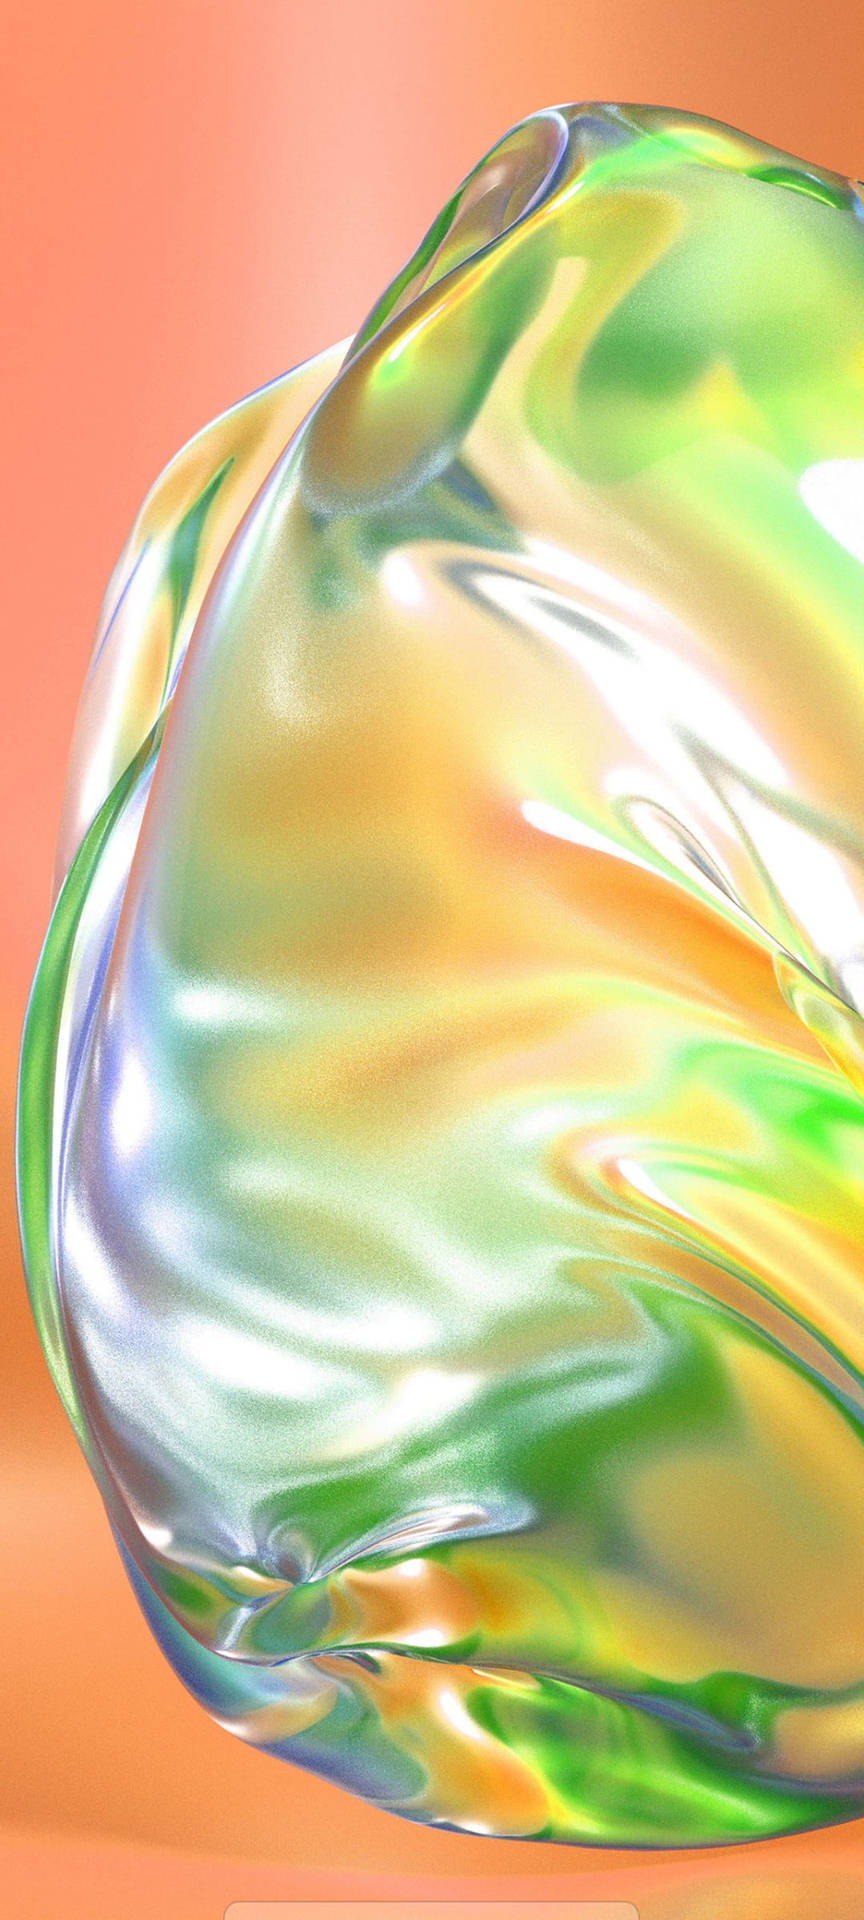 Samsung A51 Water Bubble Close-up